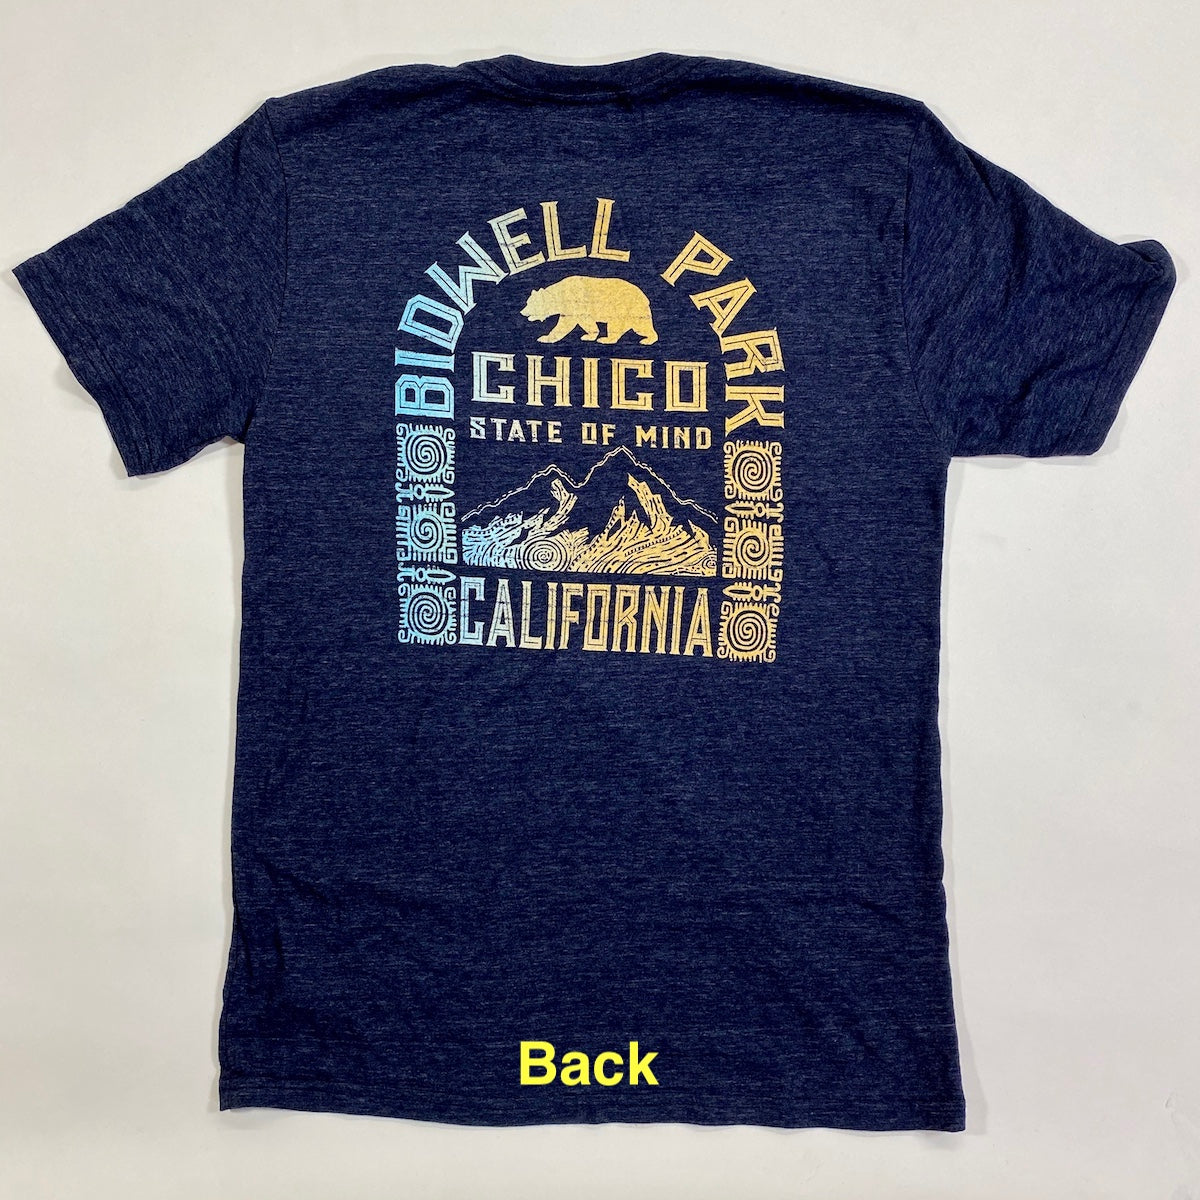 Chico State of Mind - T-shirt    